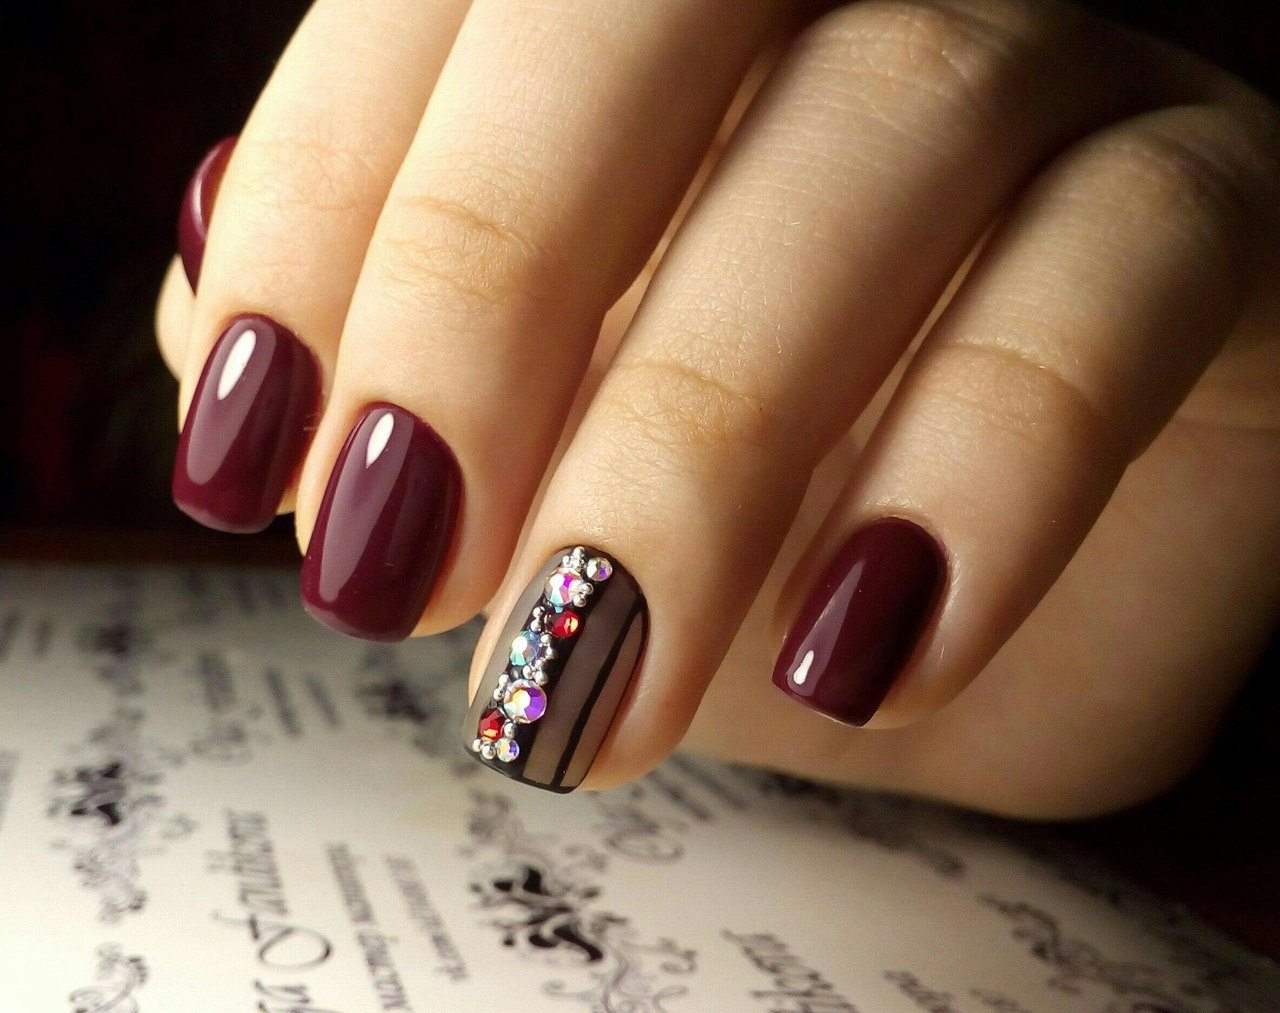 Elegant nail designs with rhinestones – glamorous and chic manicure ideas